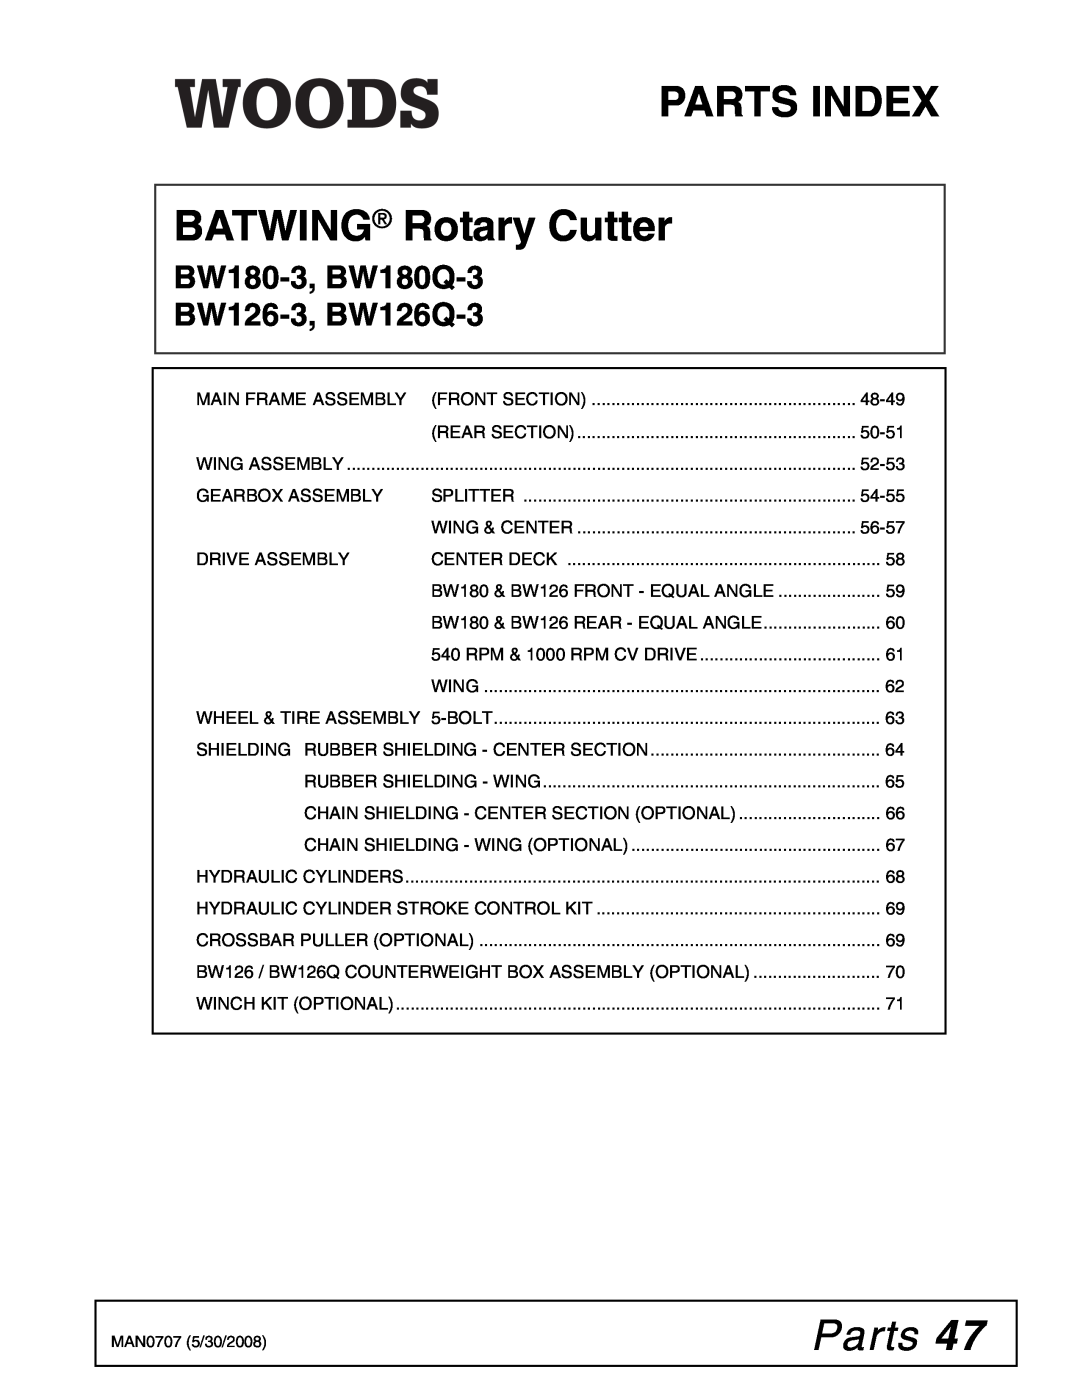 Woods Equipment manual Parts, BW180-3, BW180Q-3 BW126-3, BW126Q-3, PARTS INDEX BATWING Rotary Cutter 